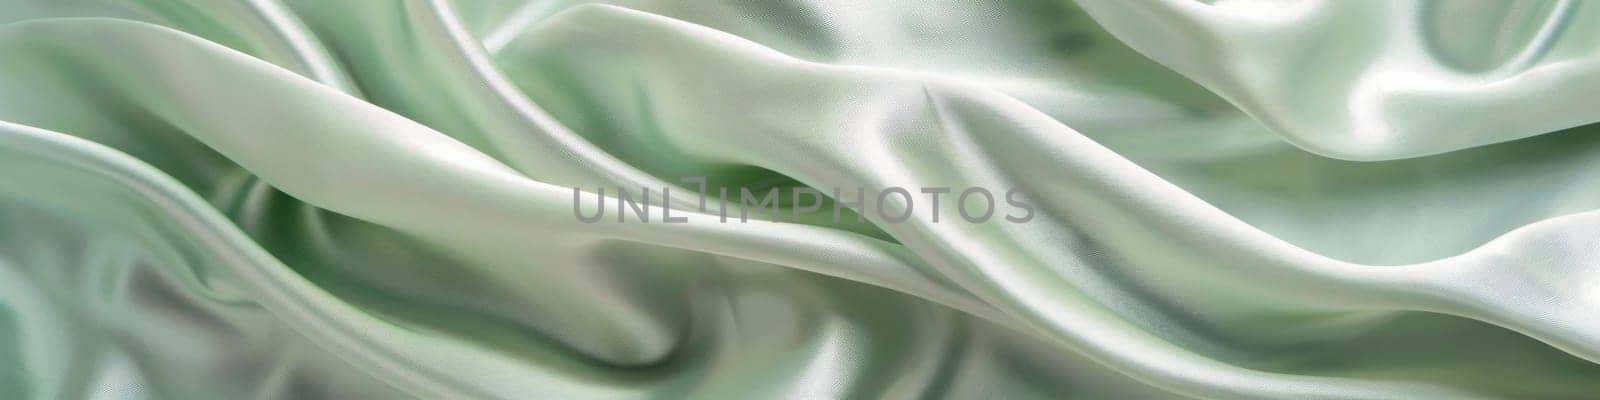 An elegant pastel green satin fabric as background or banner